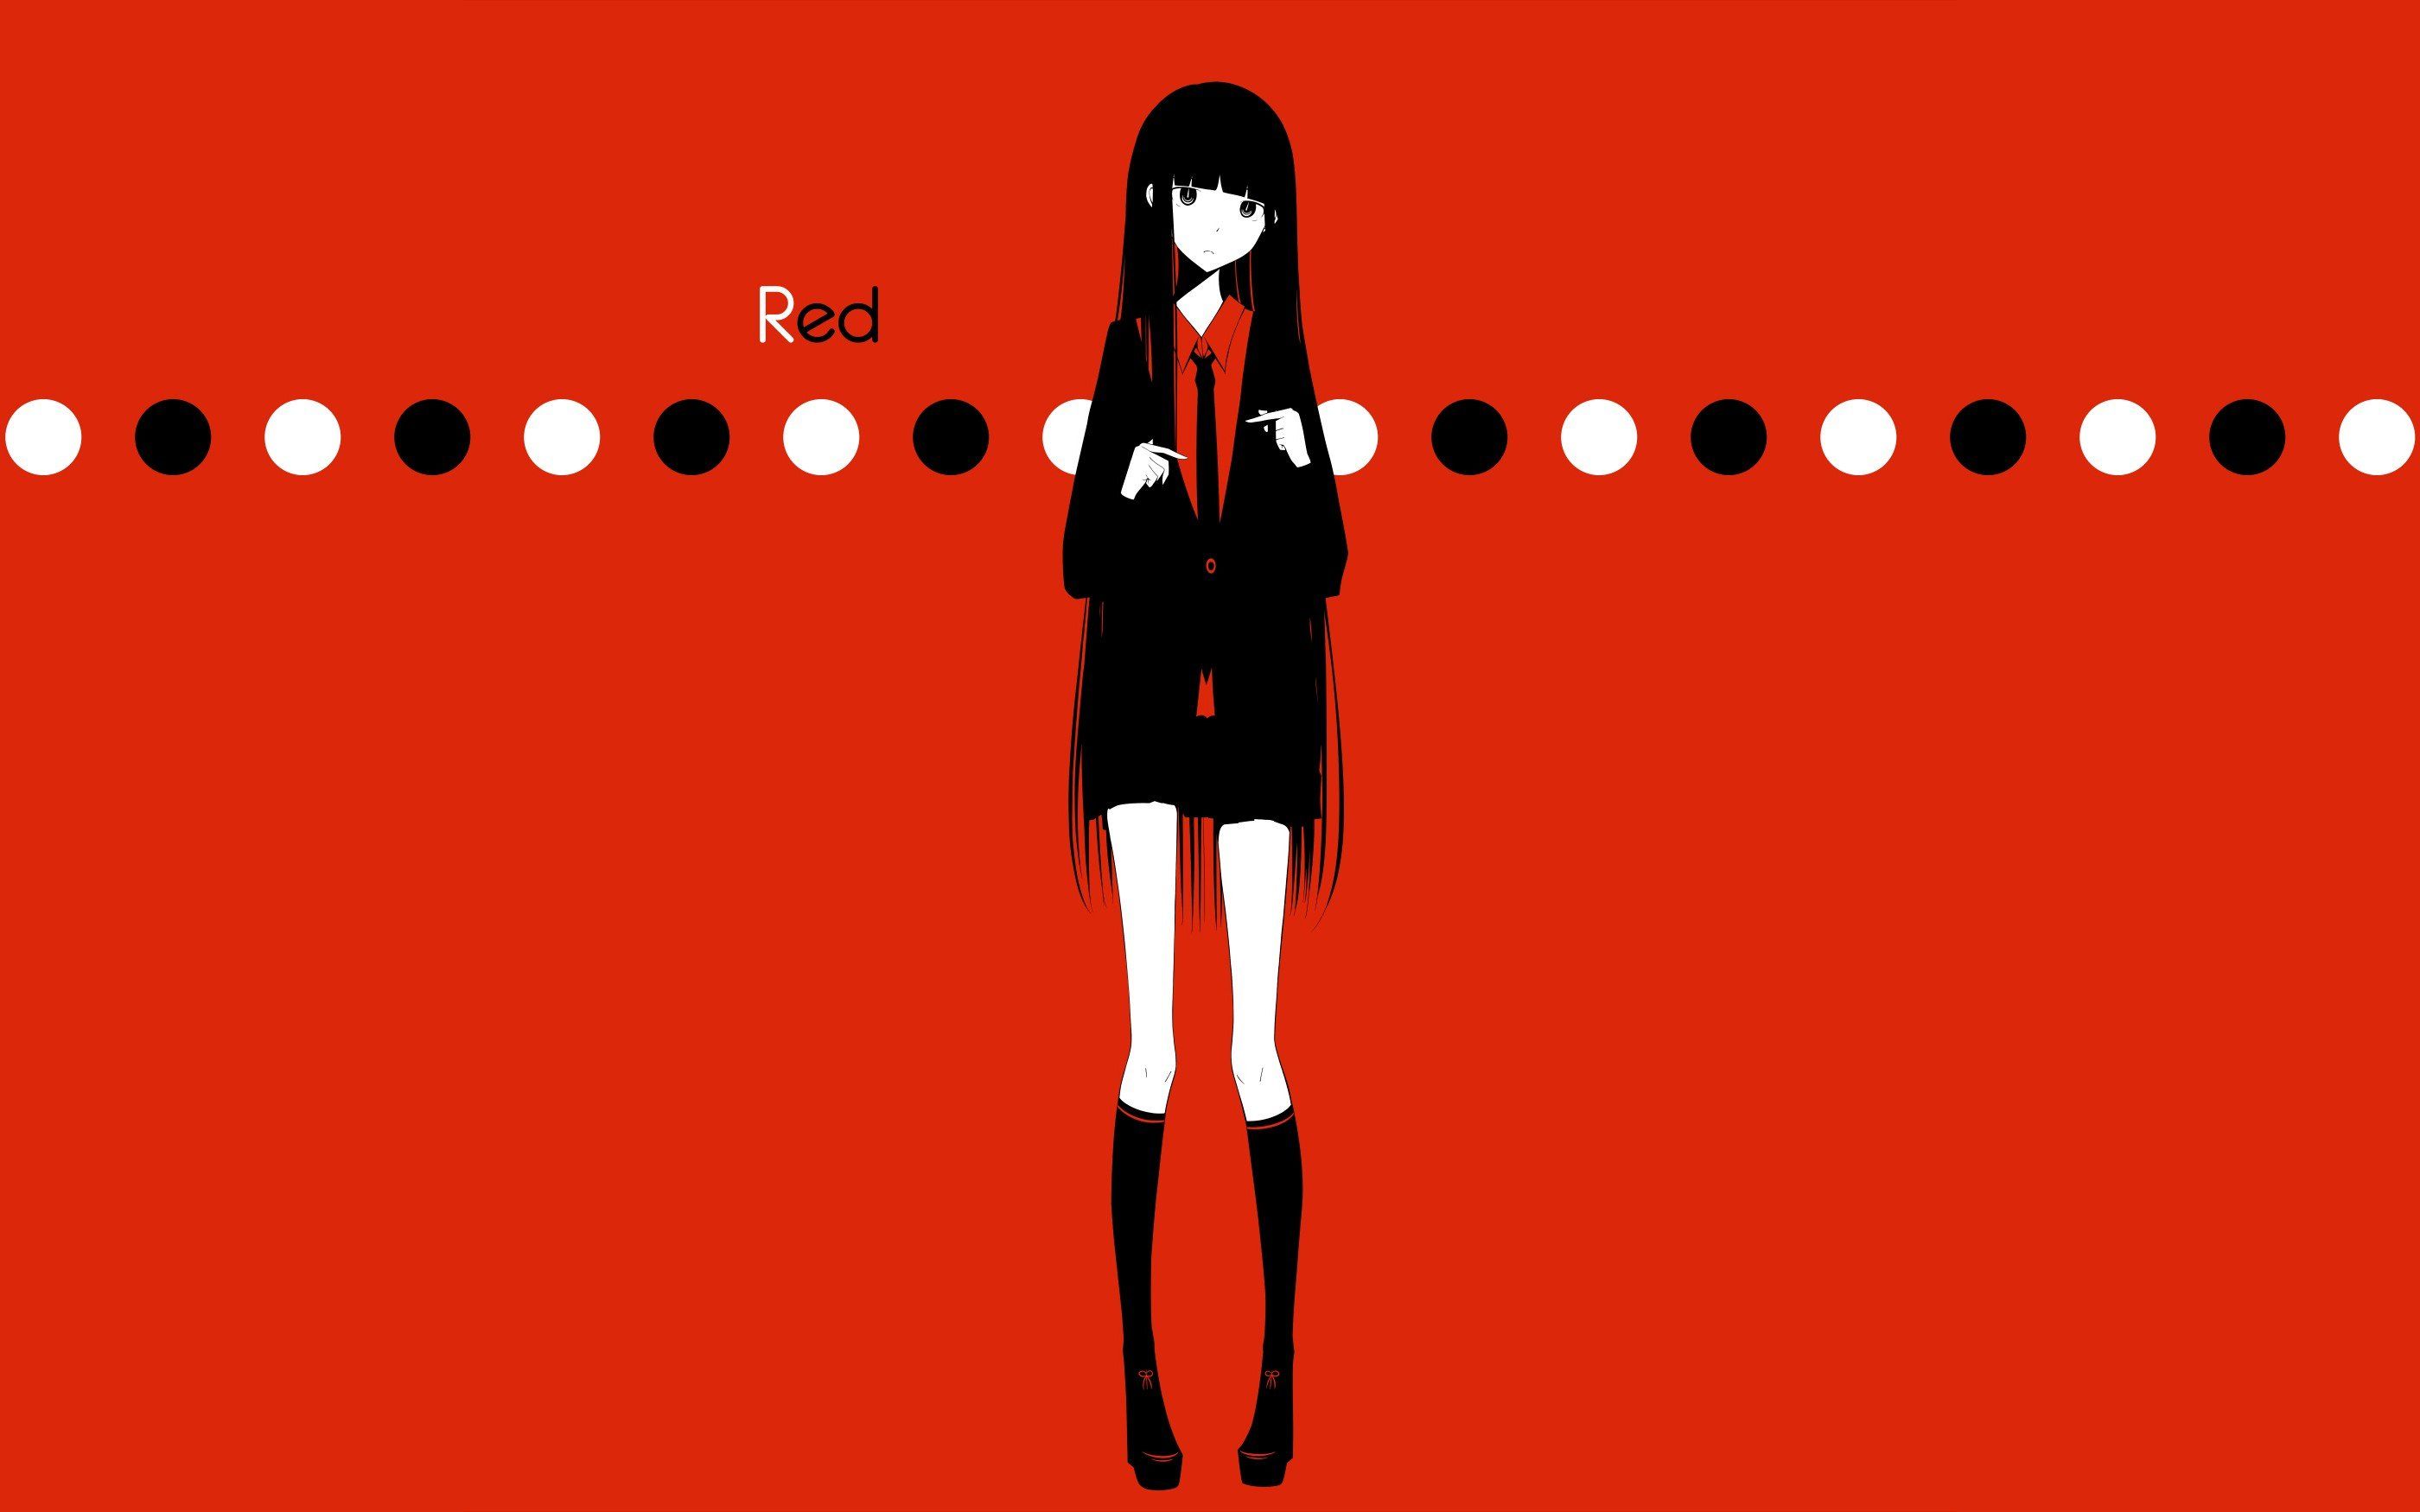 Text tie skirts circles long hair shoes shirts selective coloring simple background anime girls red background black clothes original characters knee socks haru wallpaperx1750